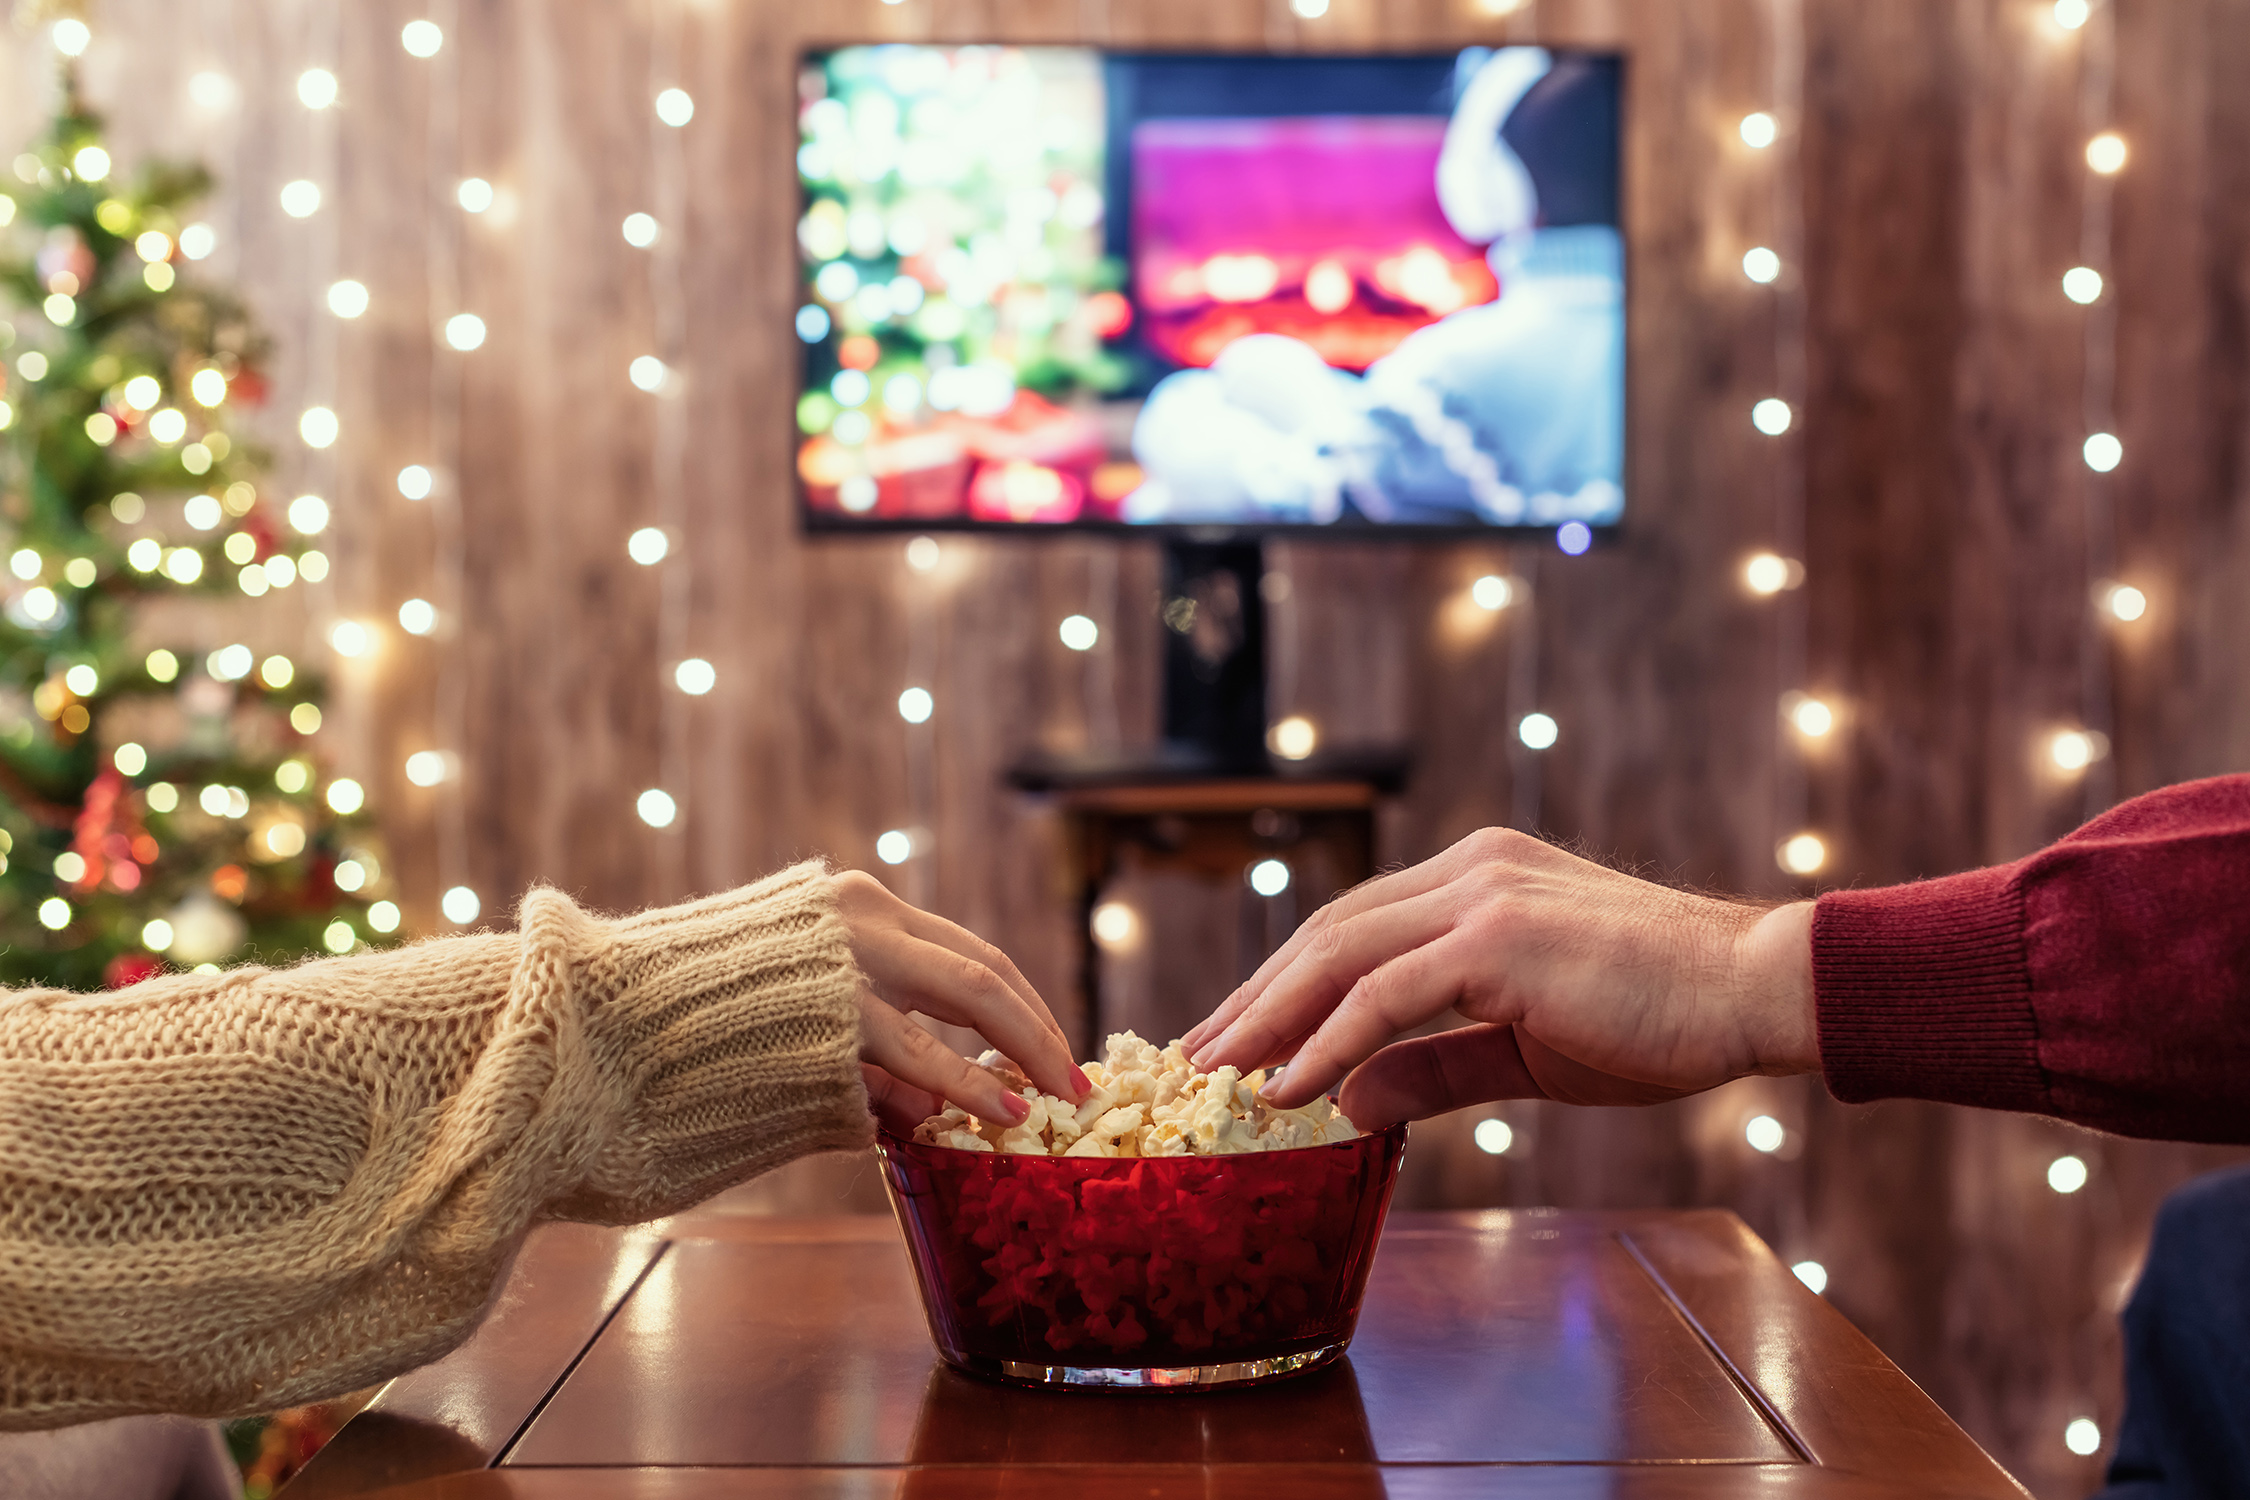 Two people reach for a bowl of popcorn while sitting on opposite sides of a small wooden table and watching television